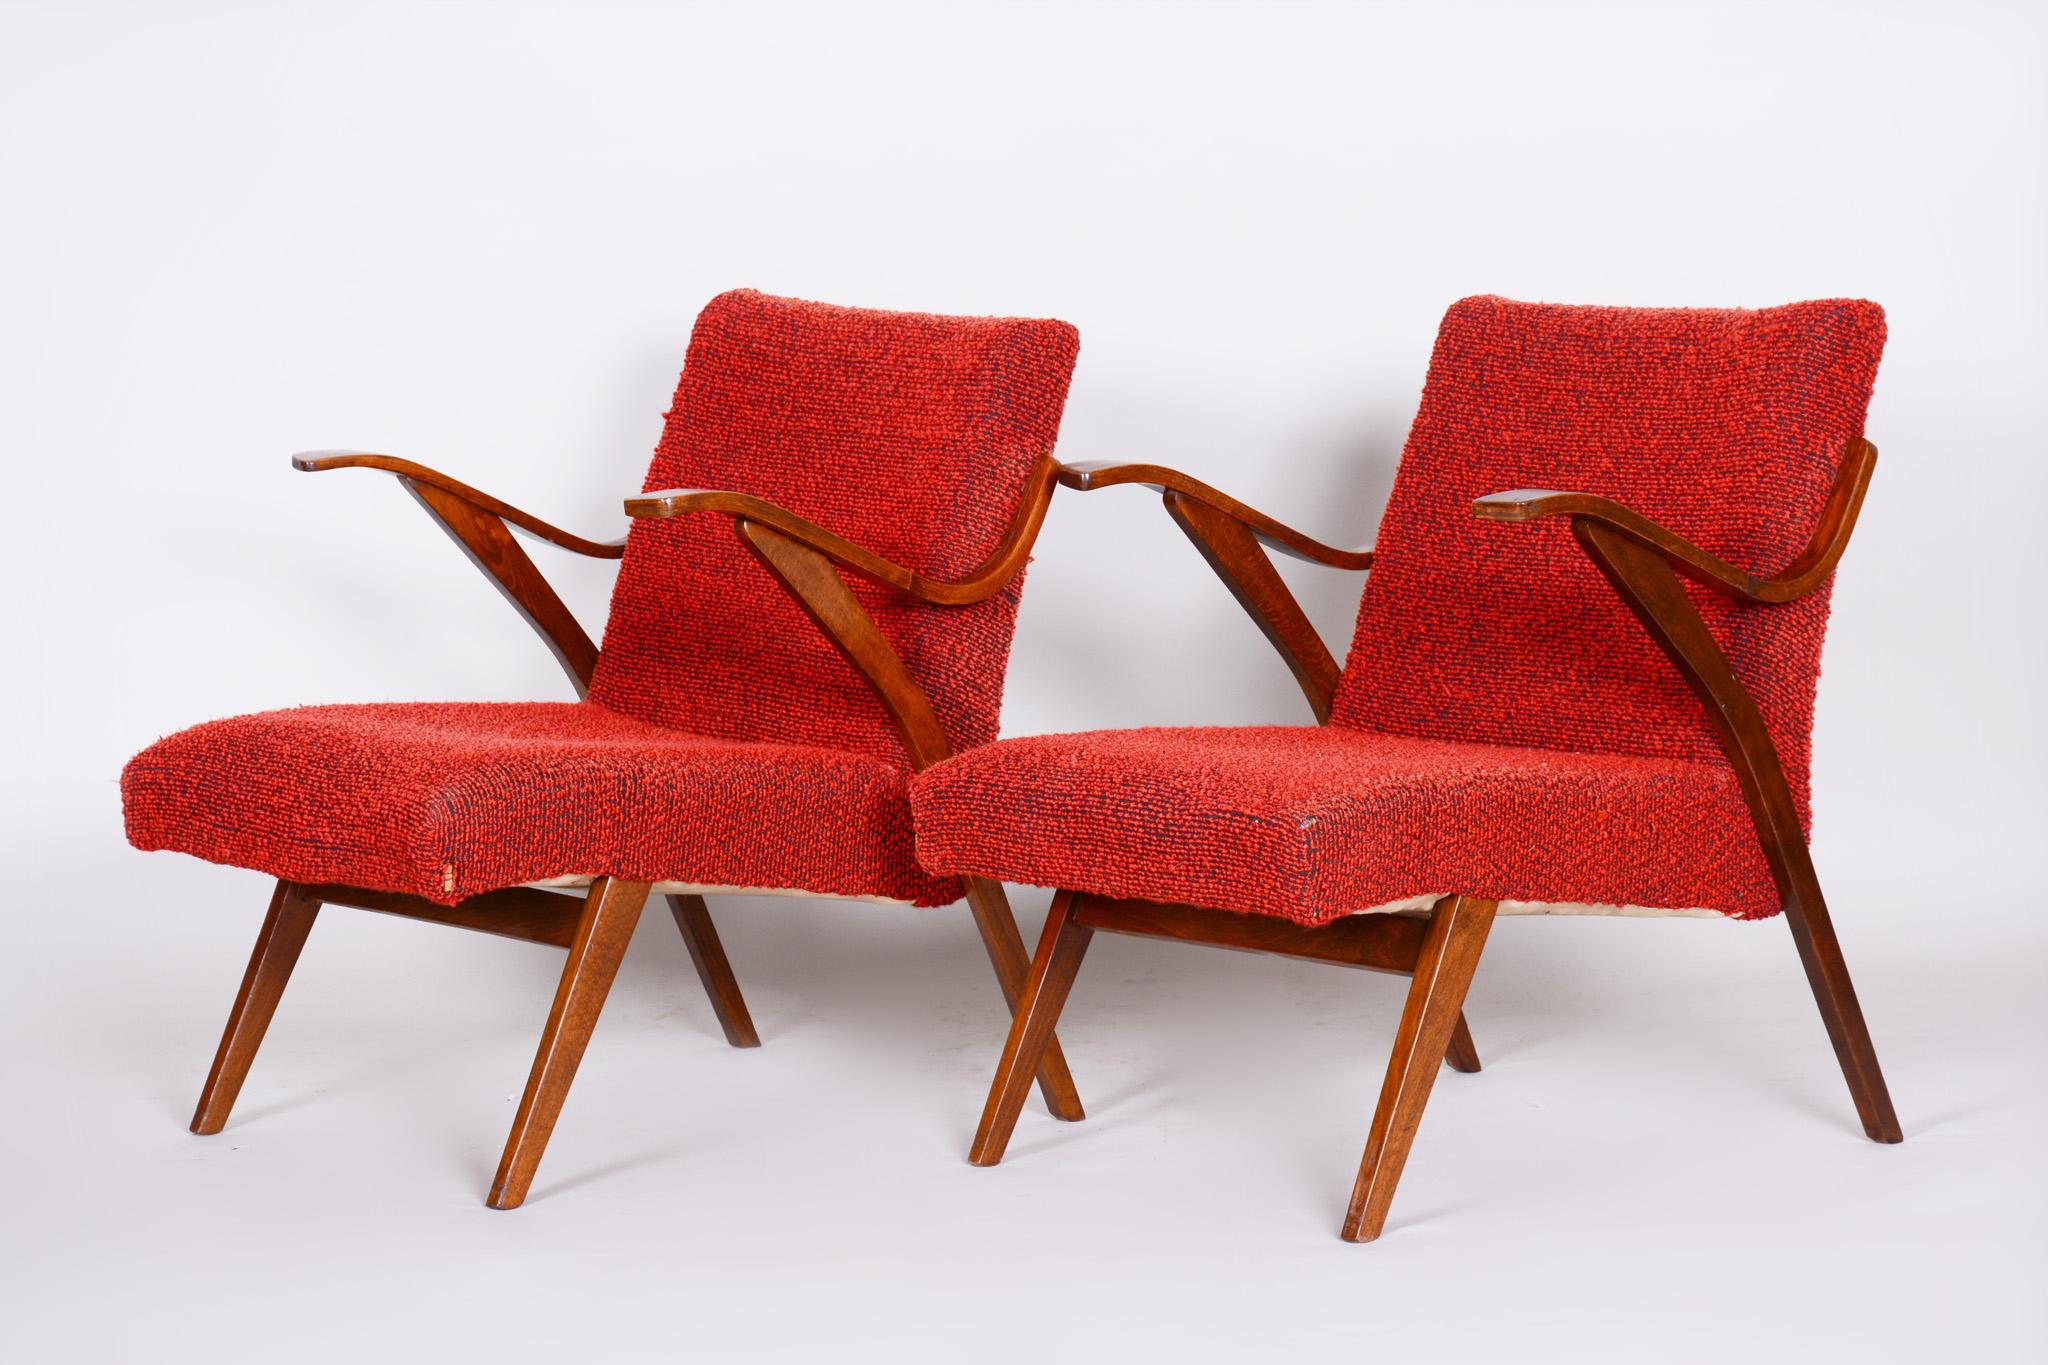 20th Century Red Mid Century Armchairs, Made in 1960s Czechia. Original Condition, Beech For Sale